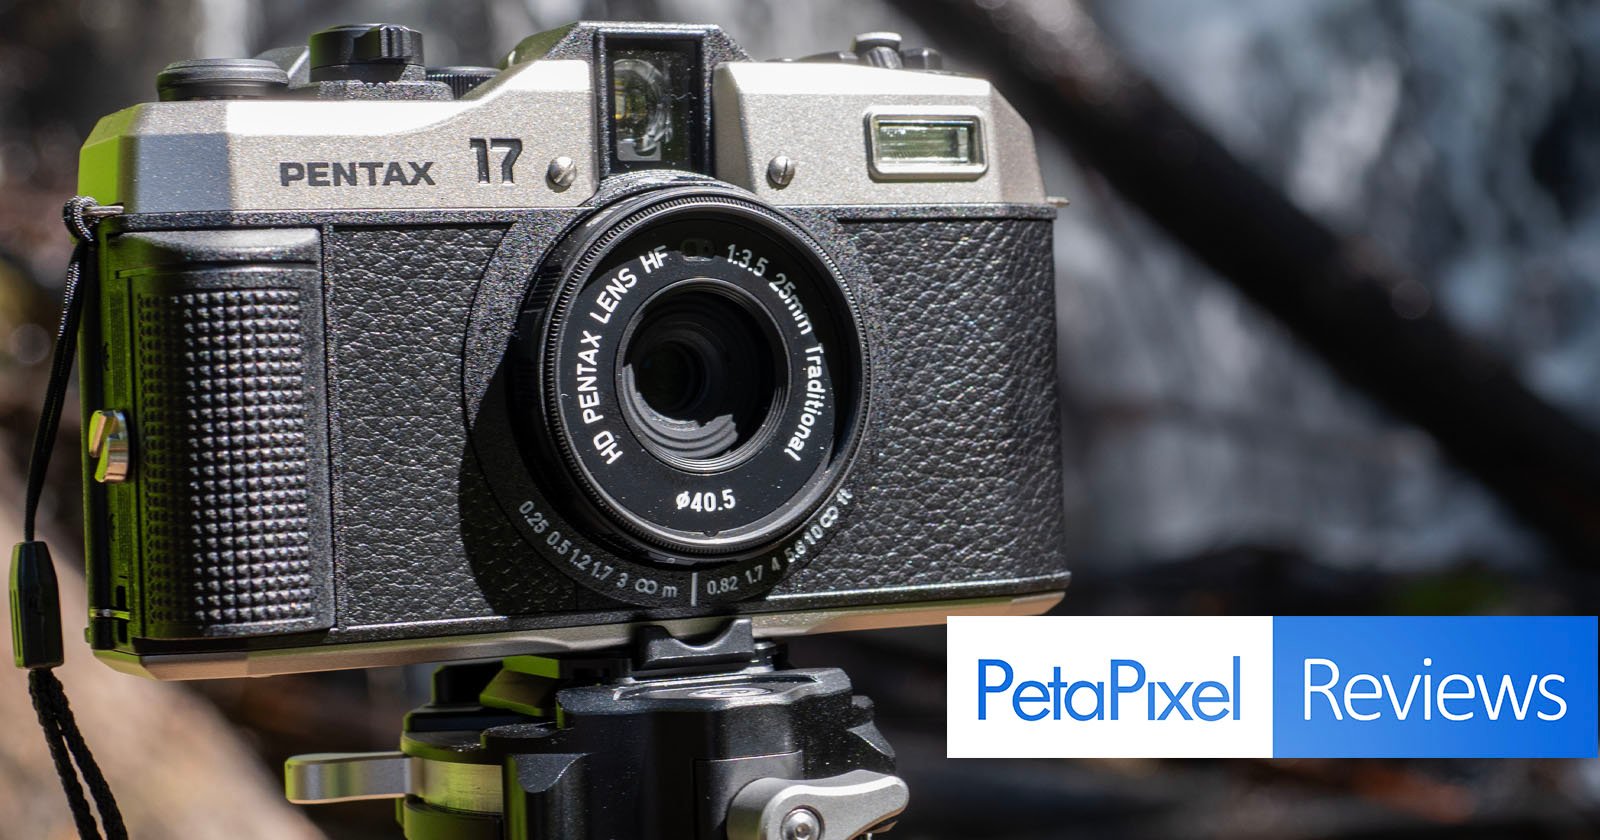 Pentax 17 Review: A Brand-New Film Experience Worth Having